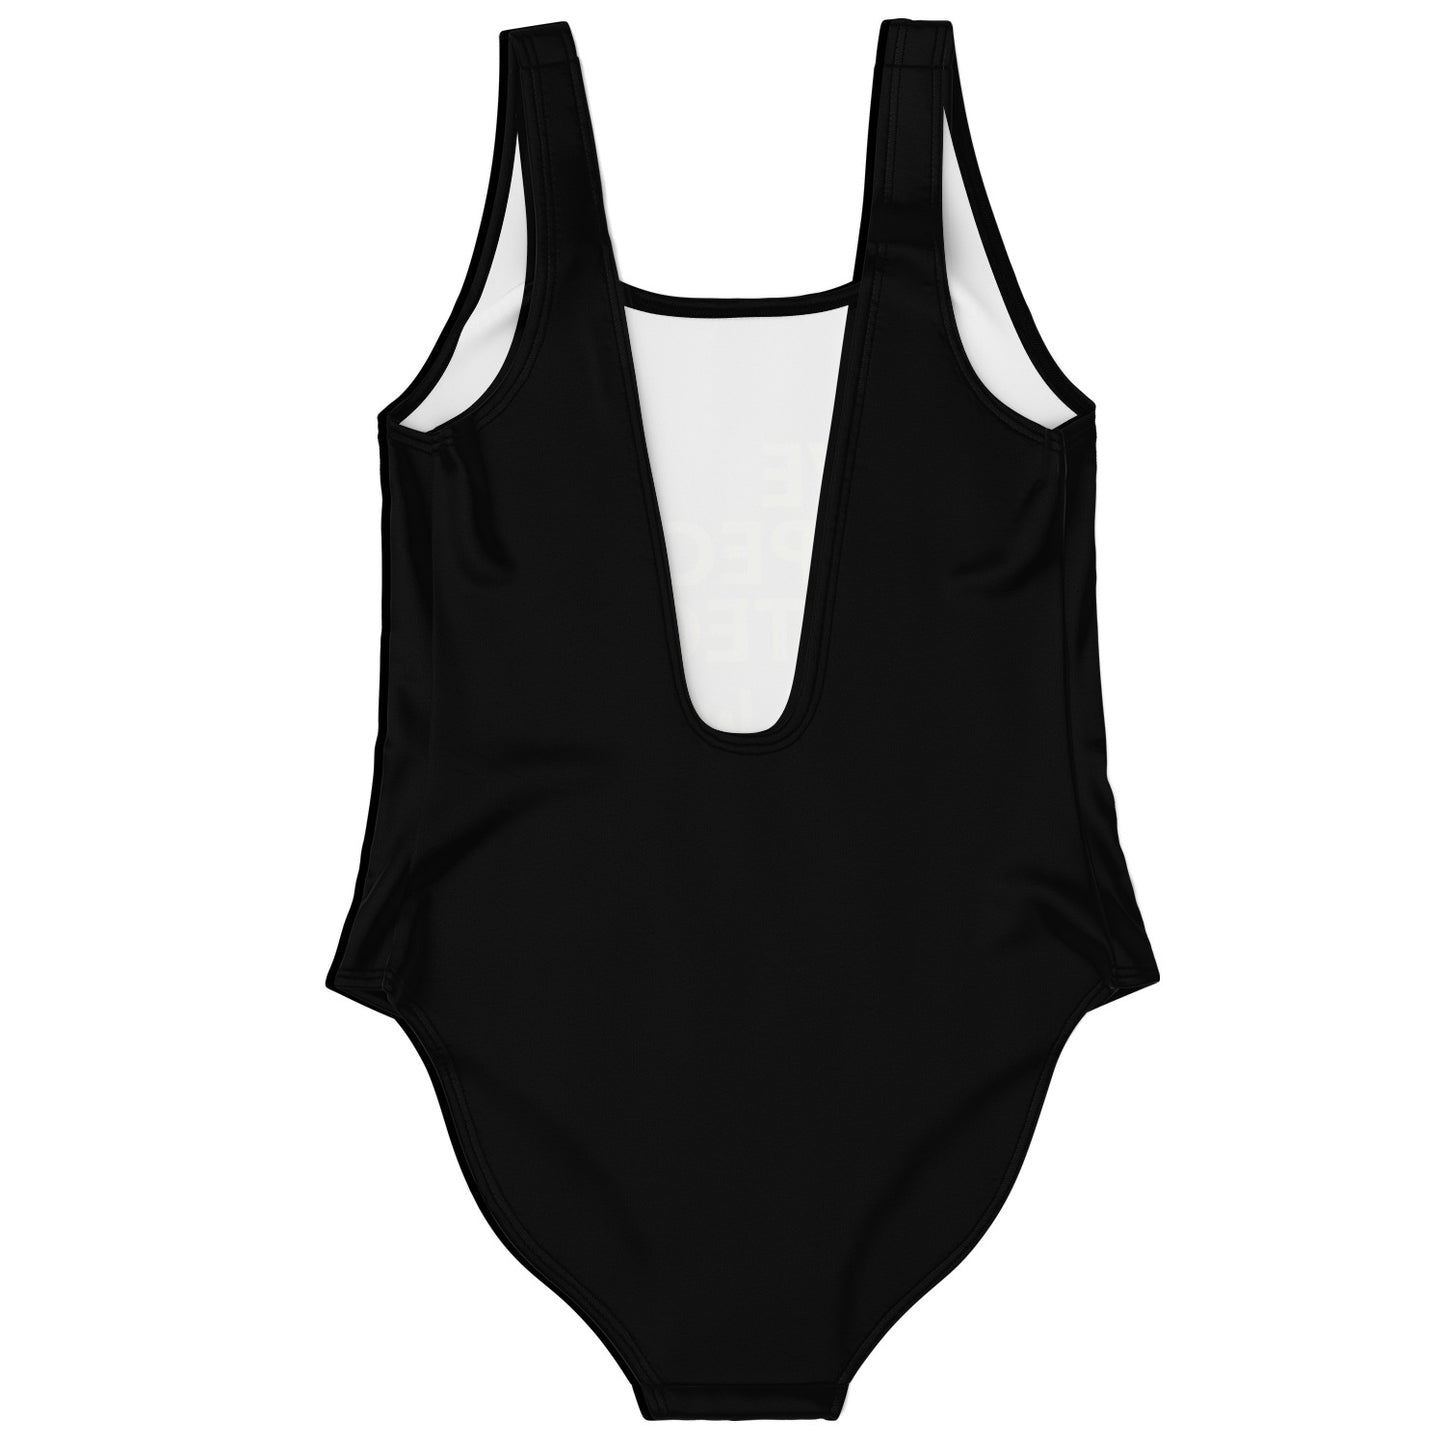 Love Respect Protect - Black Women - One-Piece Swimsuit